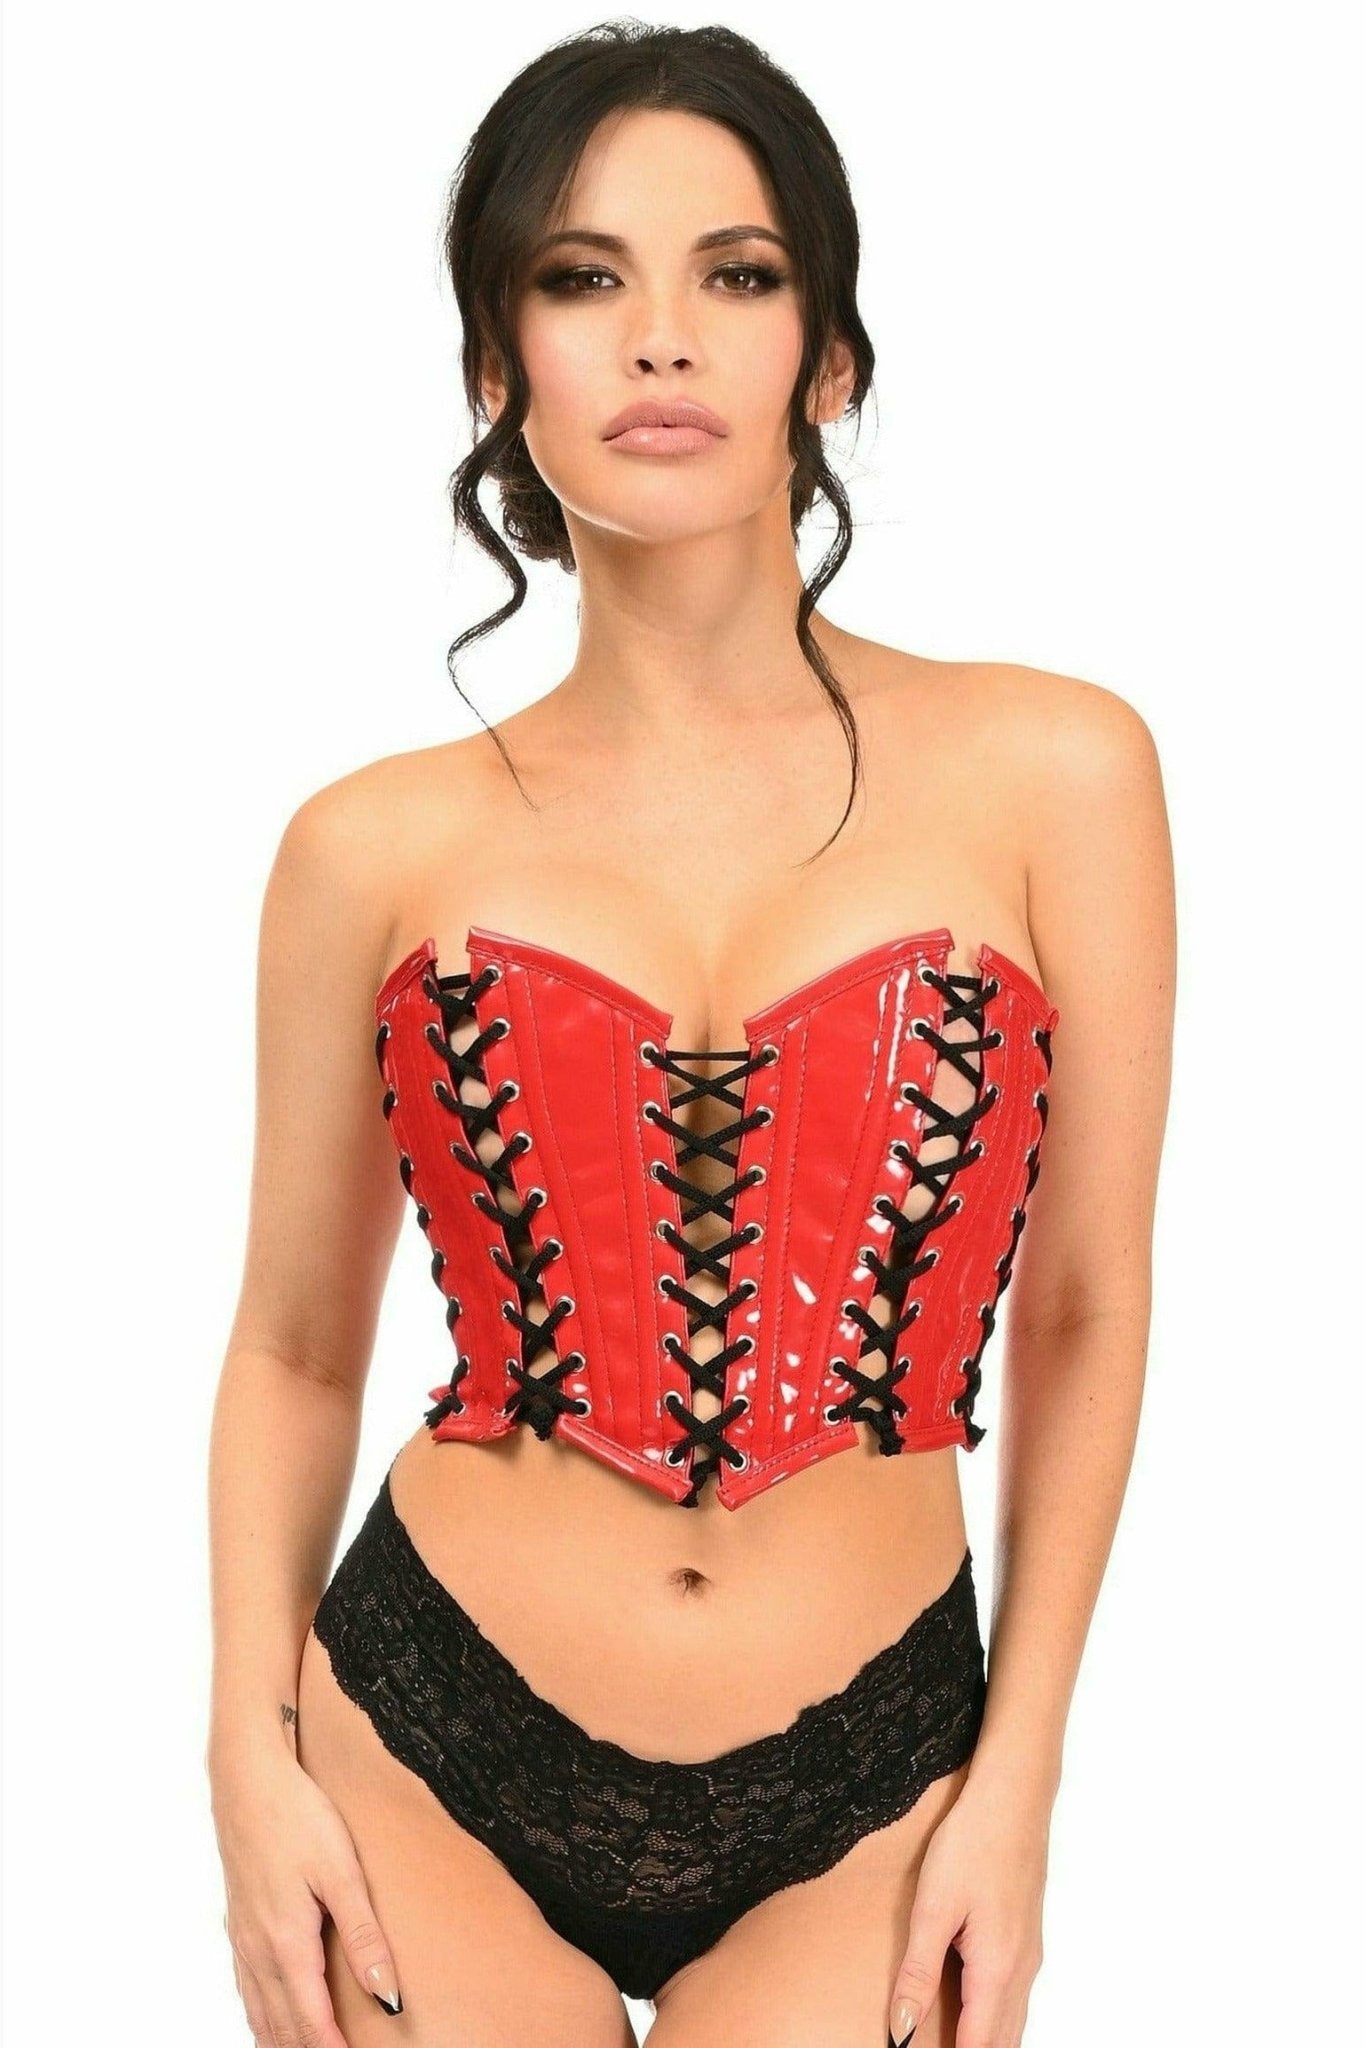 Sexy Red Patent with Black Lacing Lace-Up Bustier Musotica.com